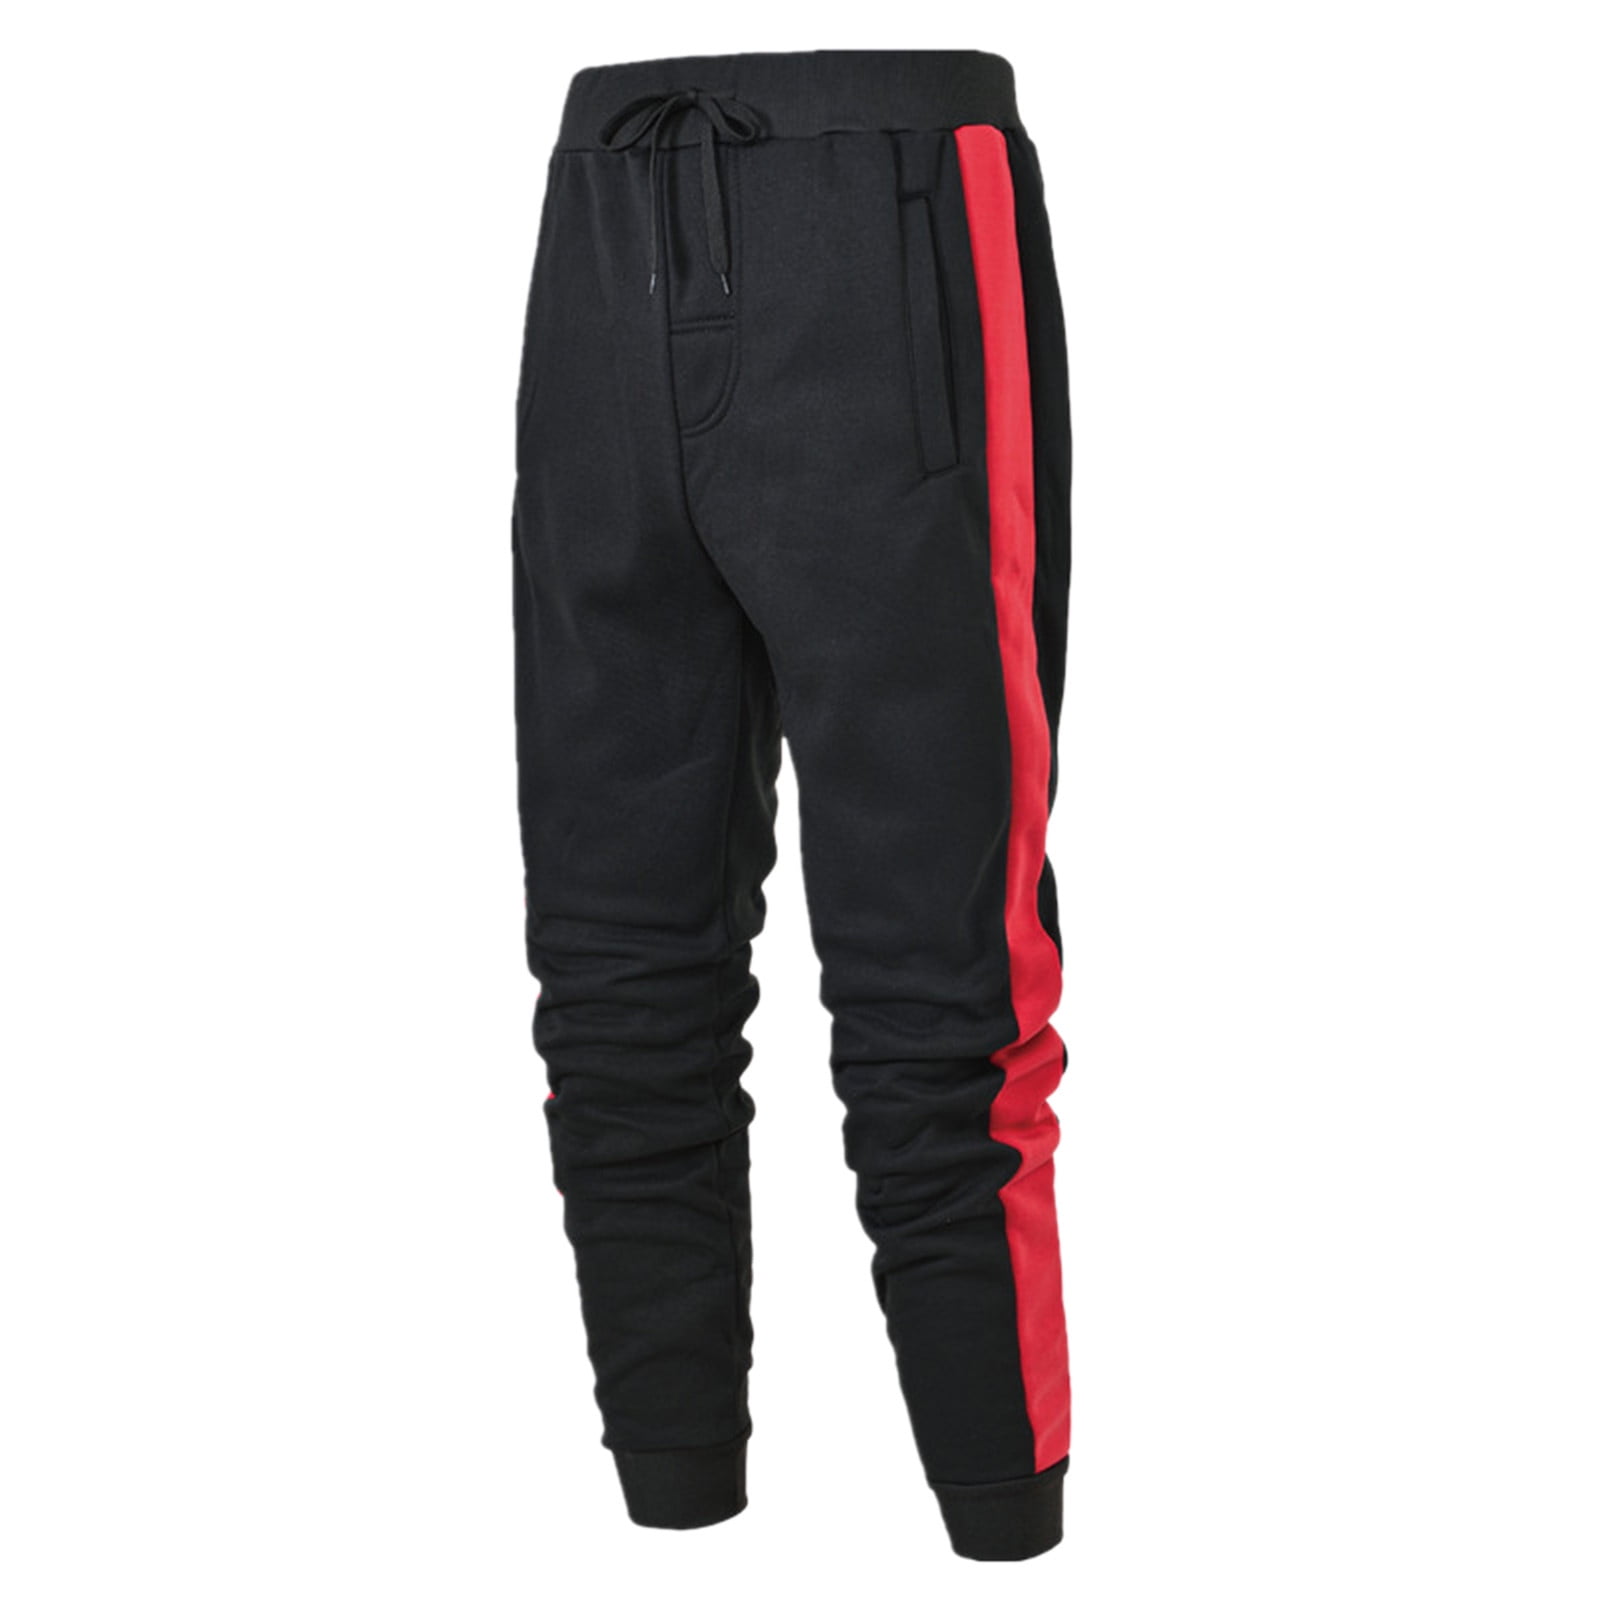 Outfmvch joggers for men Hop Spliced Track Lace Up Workout pants for ...